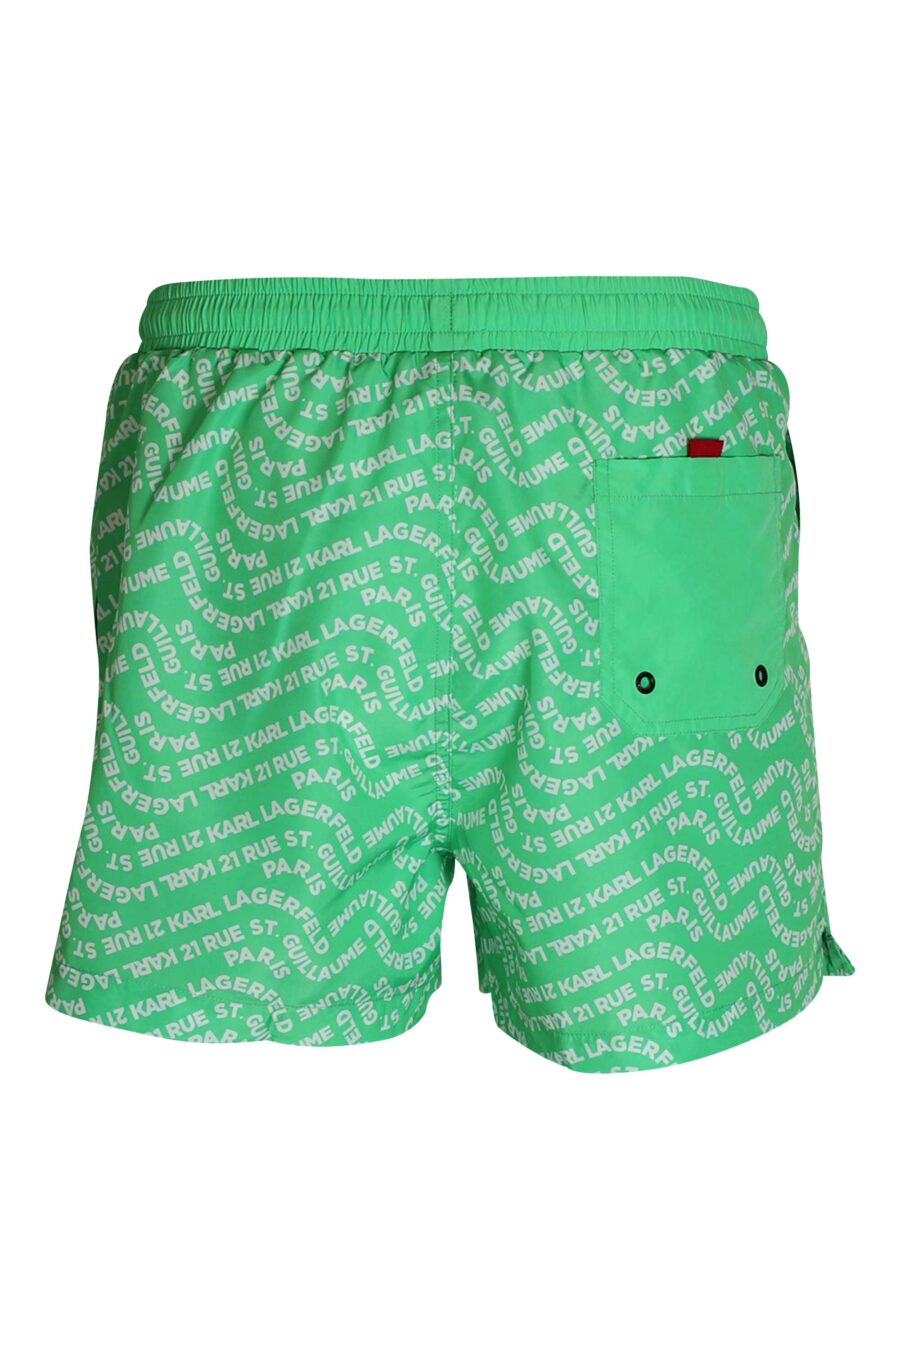 Green swimming costume "all over logo" wavy - 8720744217718 3